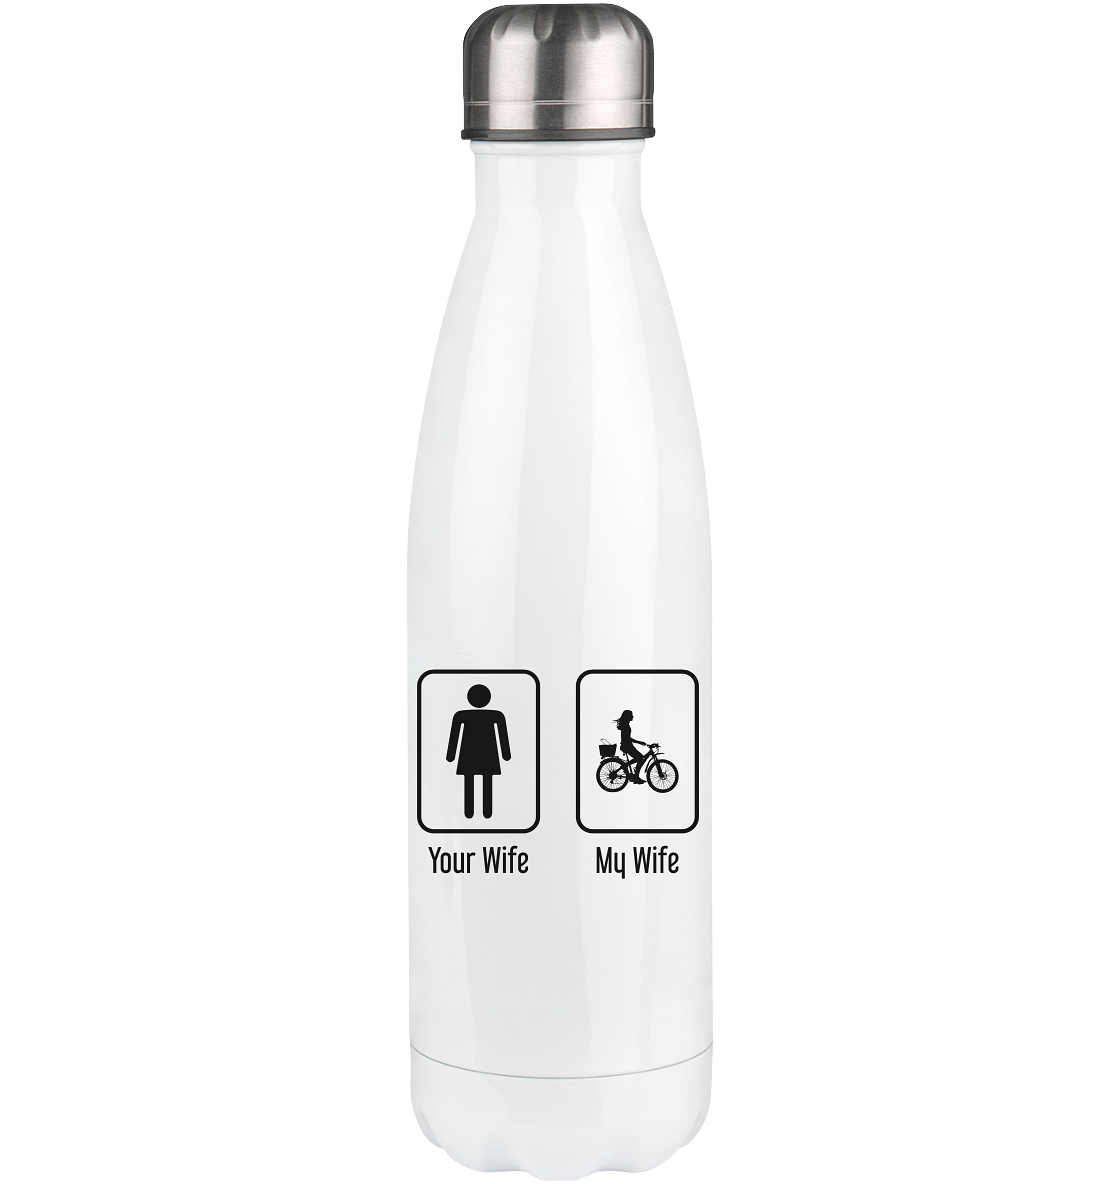 Your Wife - My Wife - Edelstahl Thermosflasche fahrrad 500ml